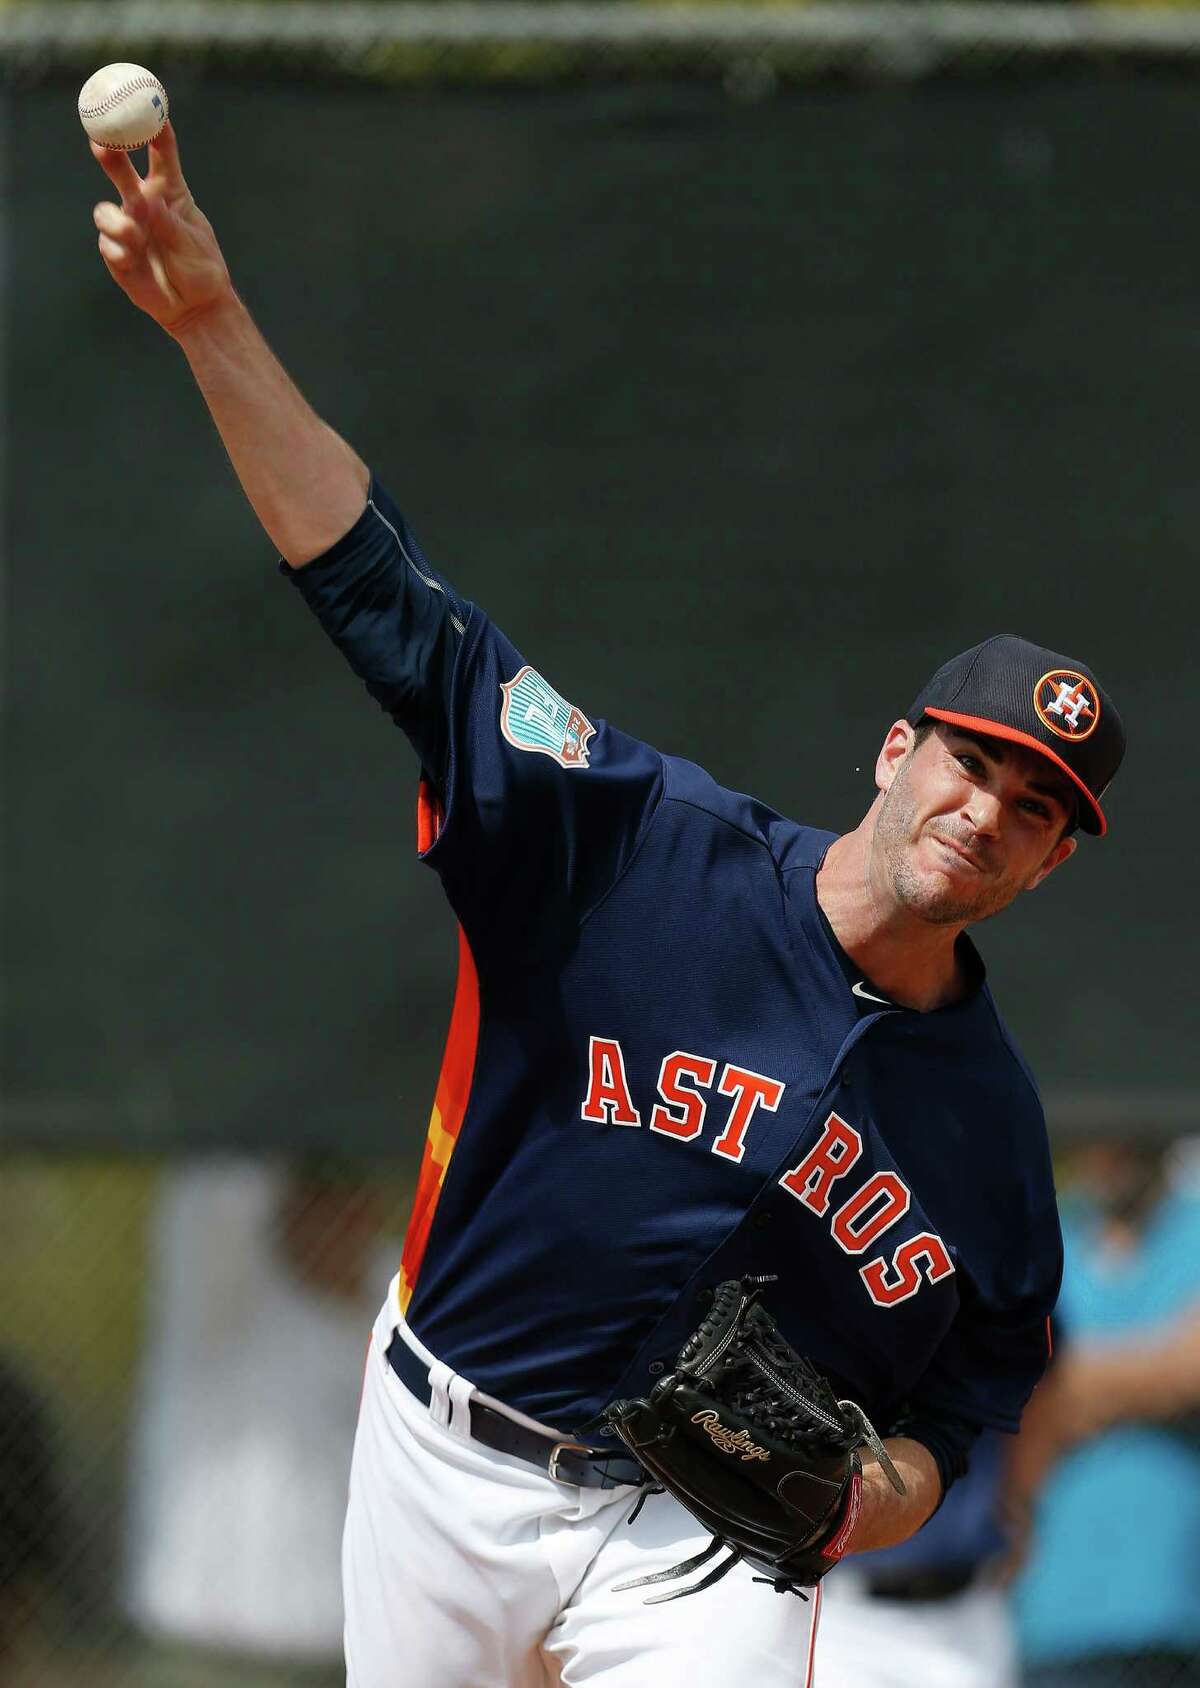 Houston Astros pitcher James Hoyt pitches during the first workout for Houston Astros pitchers and catchers for spring training in Kissimmee, Florida, Friday, Feb. 19, 2016.